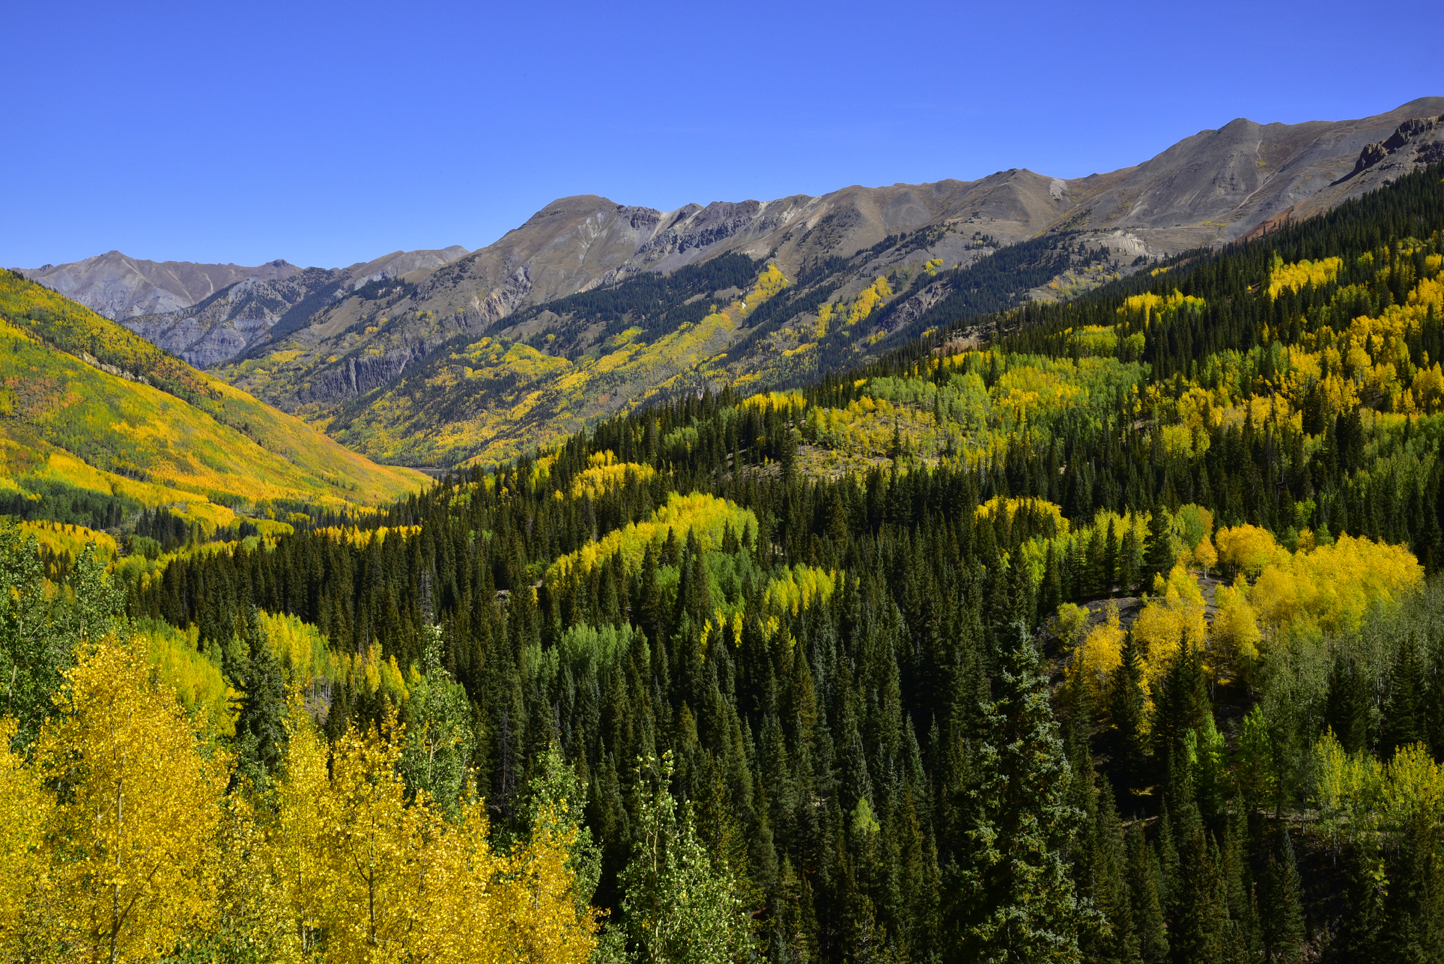 Fall colors, mountains  -  looking approximately north from Red Mountain Mining Exhibit, San Juan Skyway, Colorado